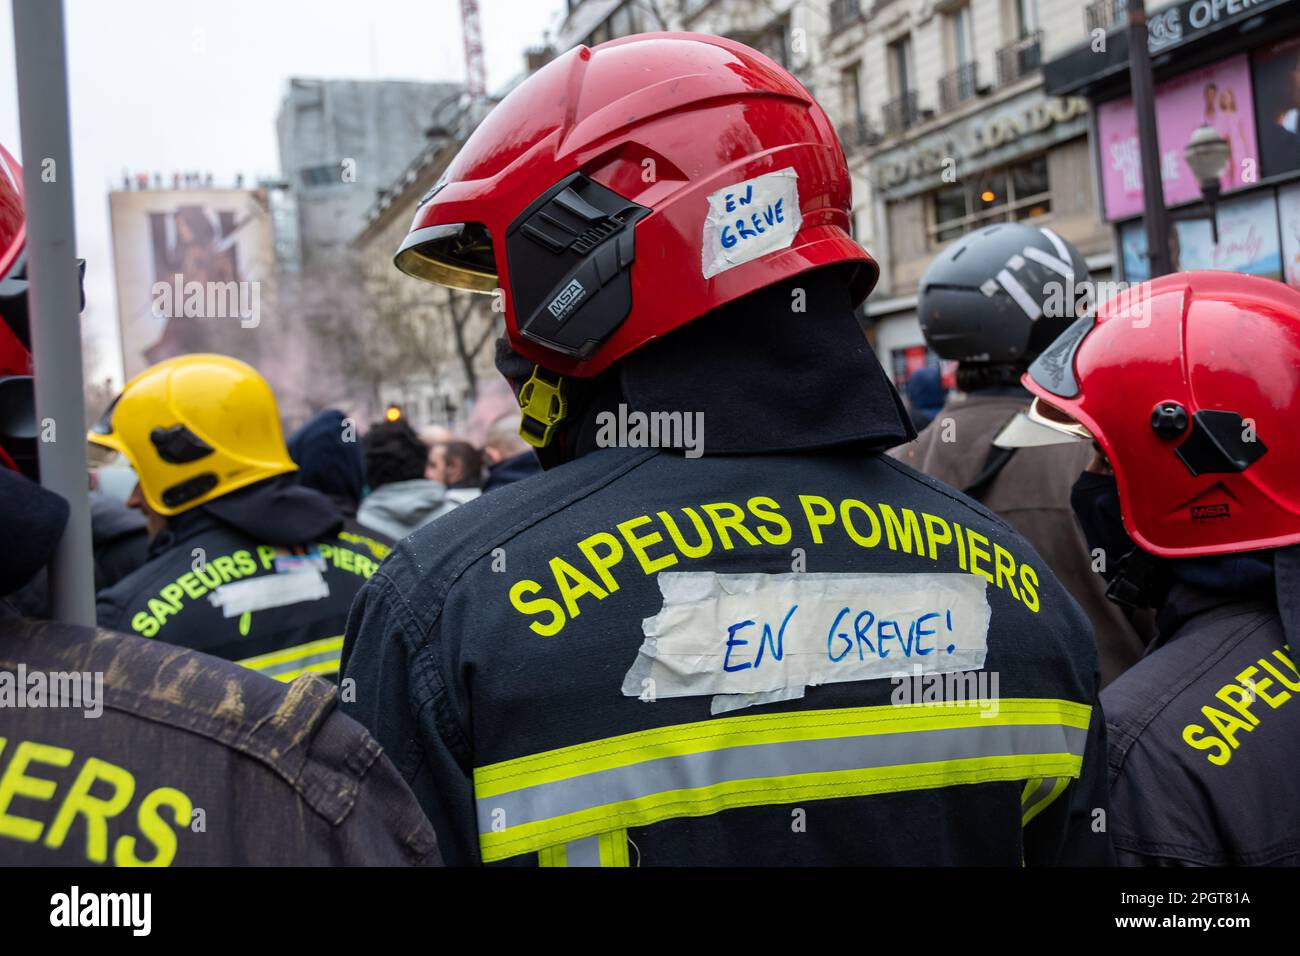 Striking French firefighters in fire gear seen from behind during a protest against the retirement reform in France Stock Photo